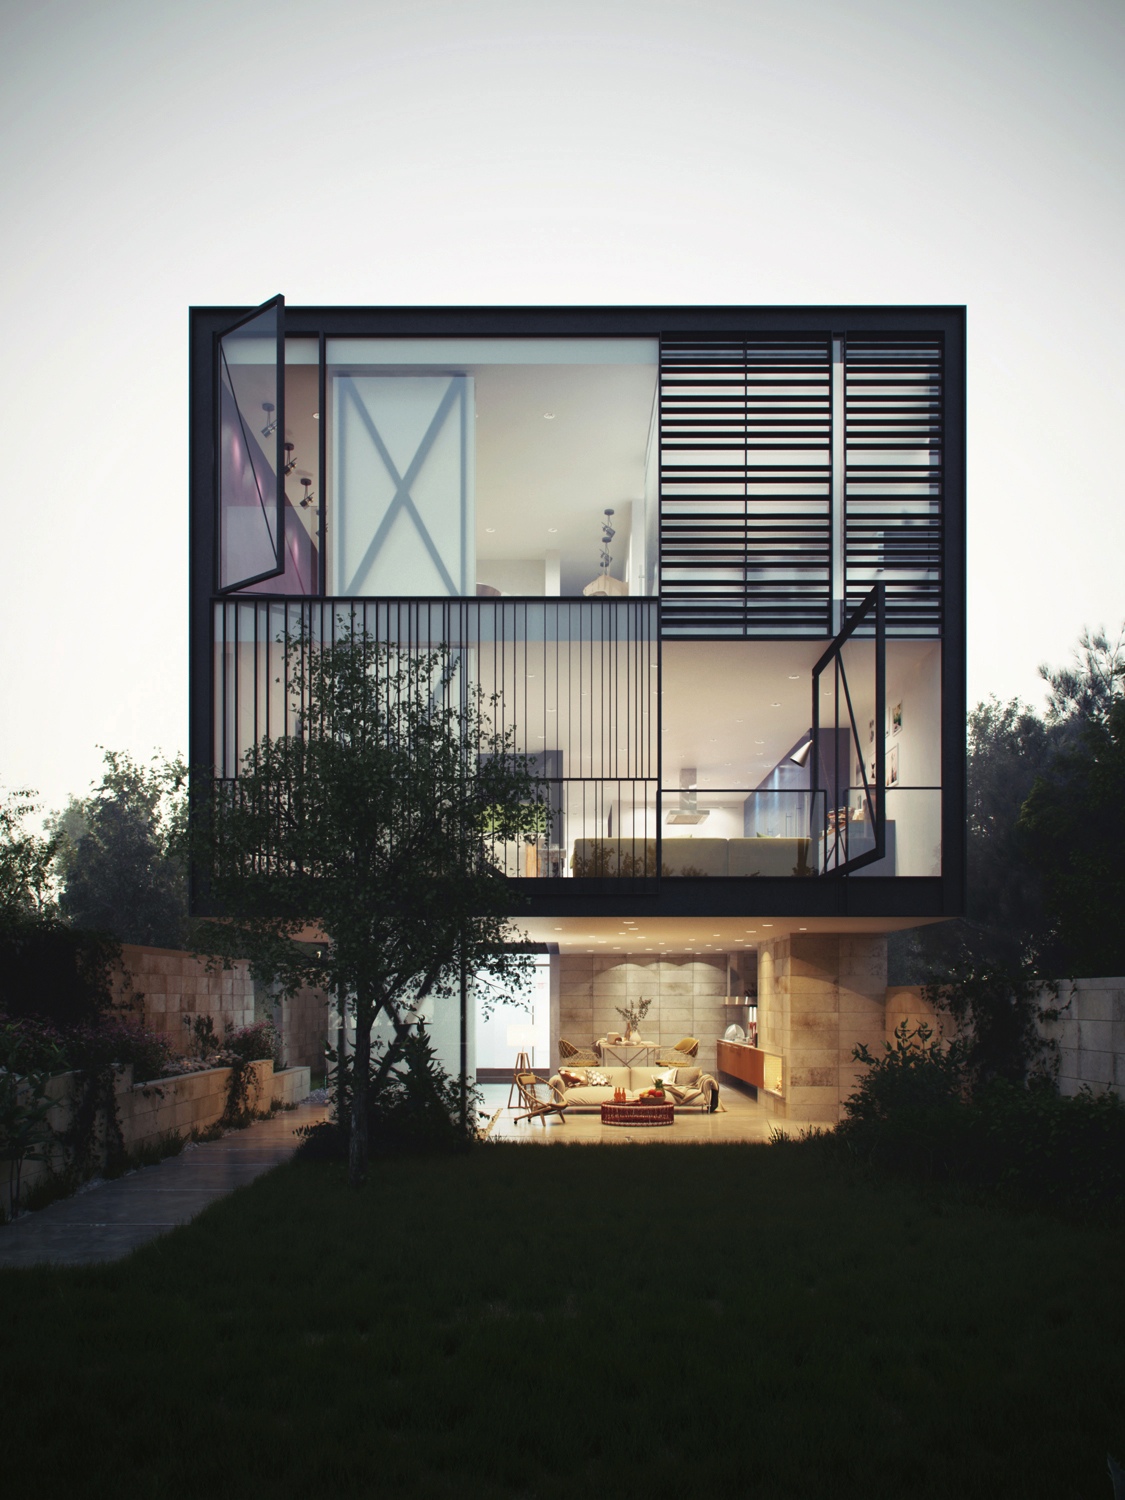 Architectural Concept of a Glass Box Home